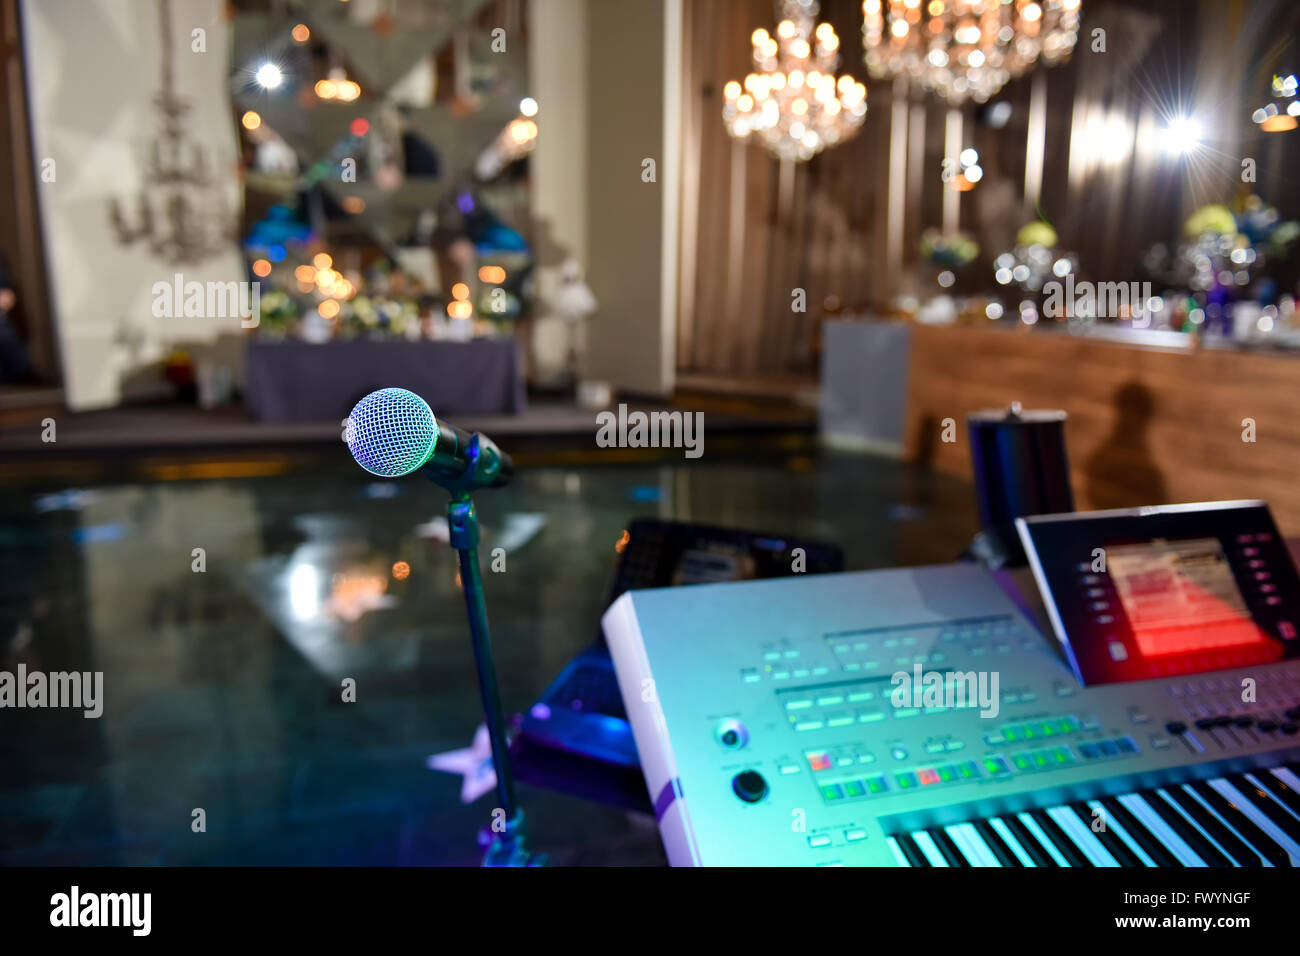 Microphone and electronic organ in ambient light bar Stock Photo